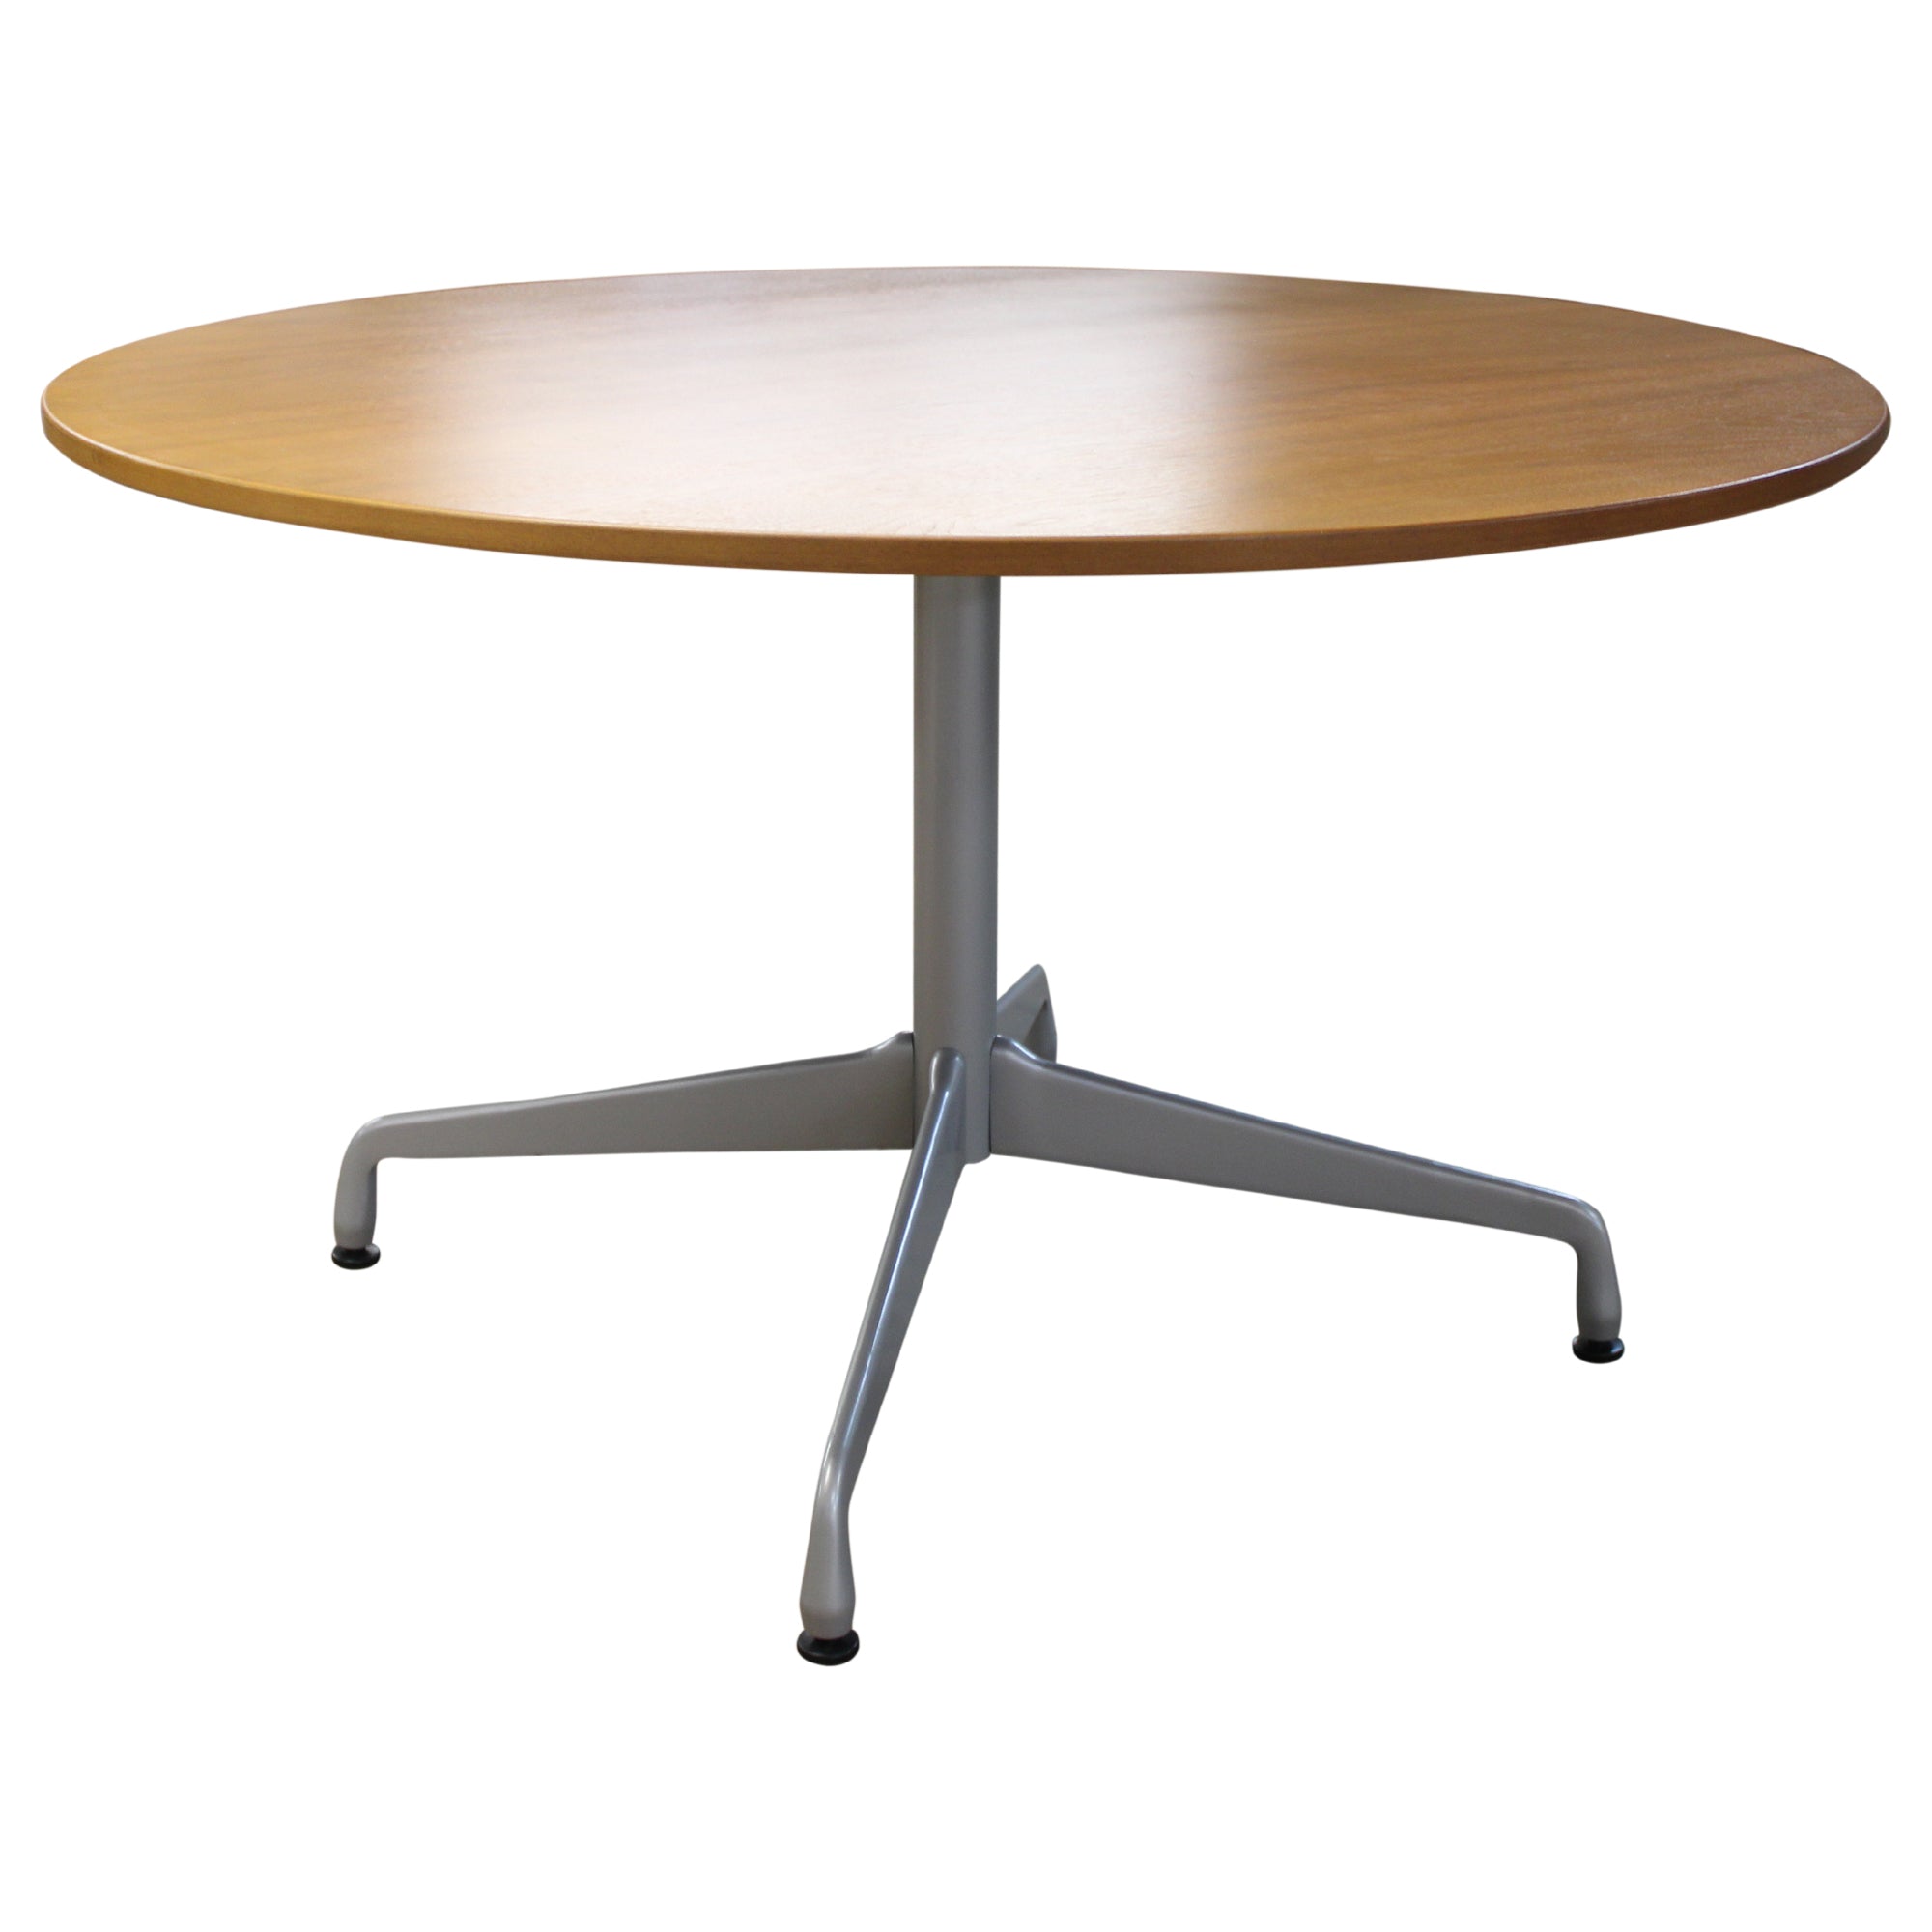 Herman Miller Eames Round Table, Chestnut - Preowned